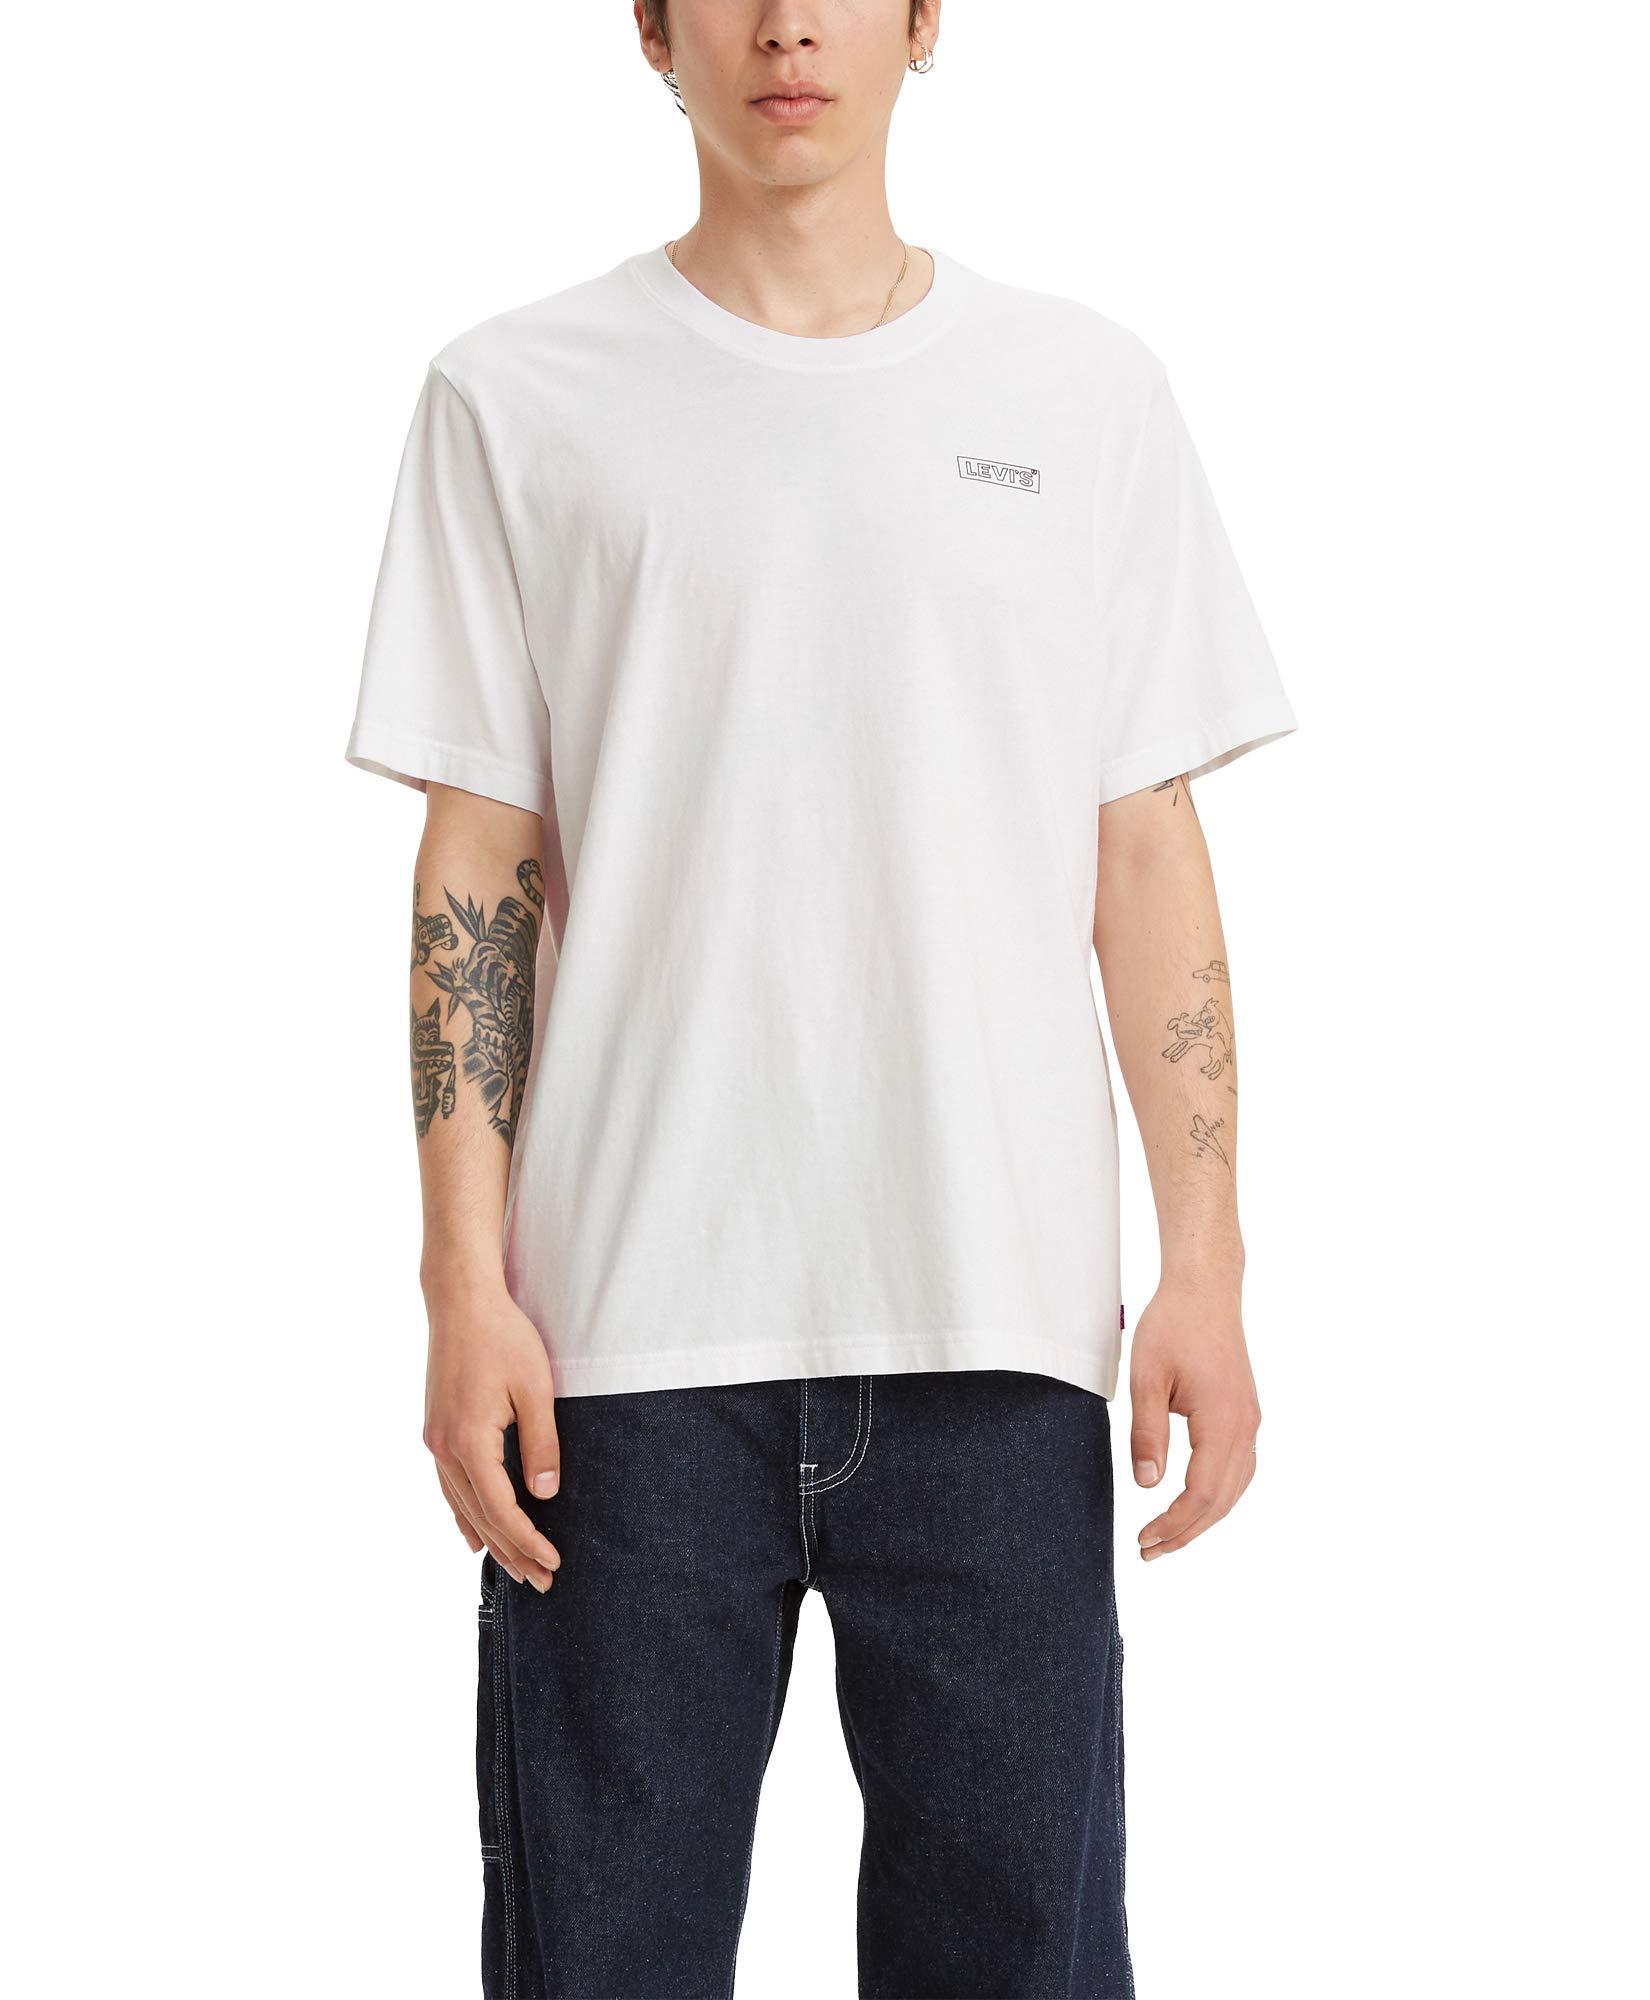 Levi's Graphic Tees in White for Men - Lyst